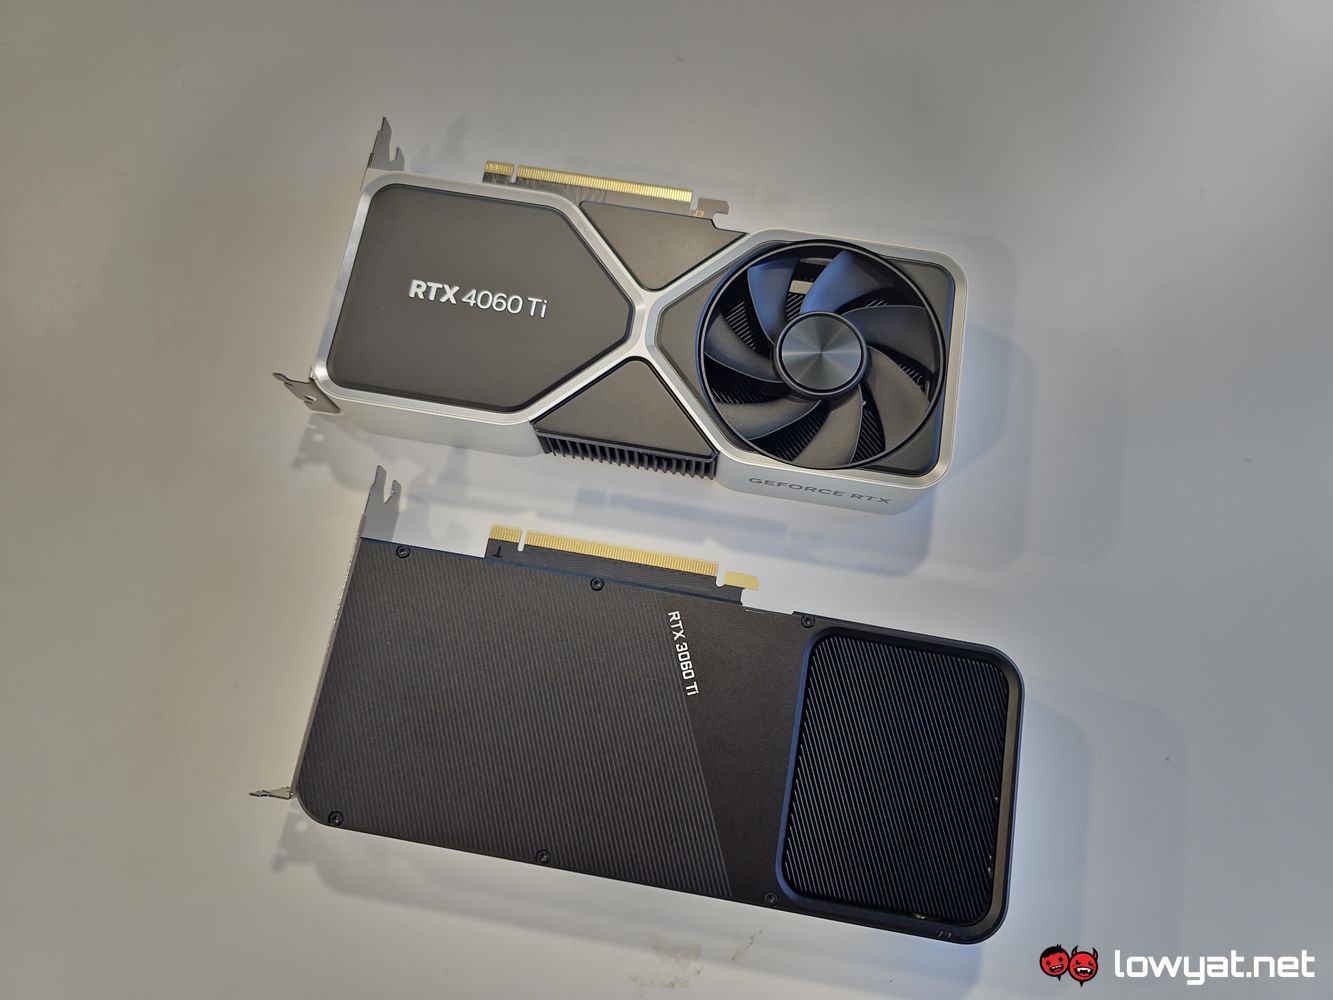 Nvidia GeForce RTX 4060 Ti 16GB launches to no fanfare or reviews